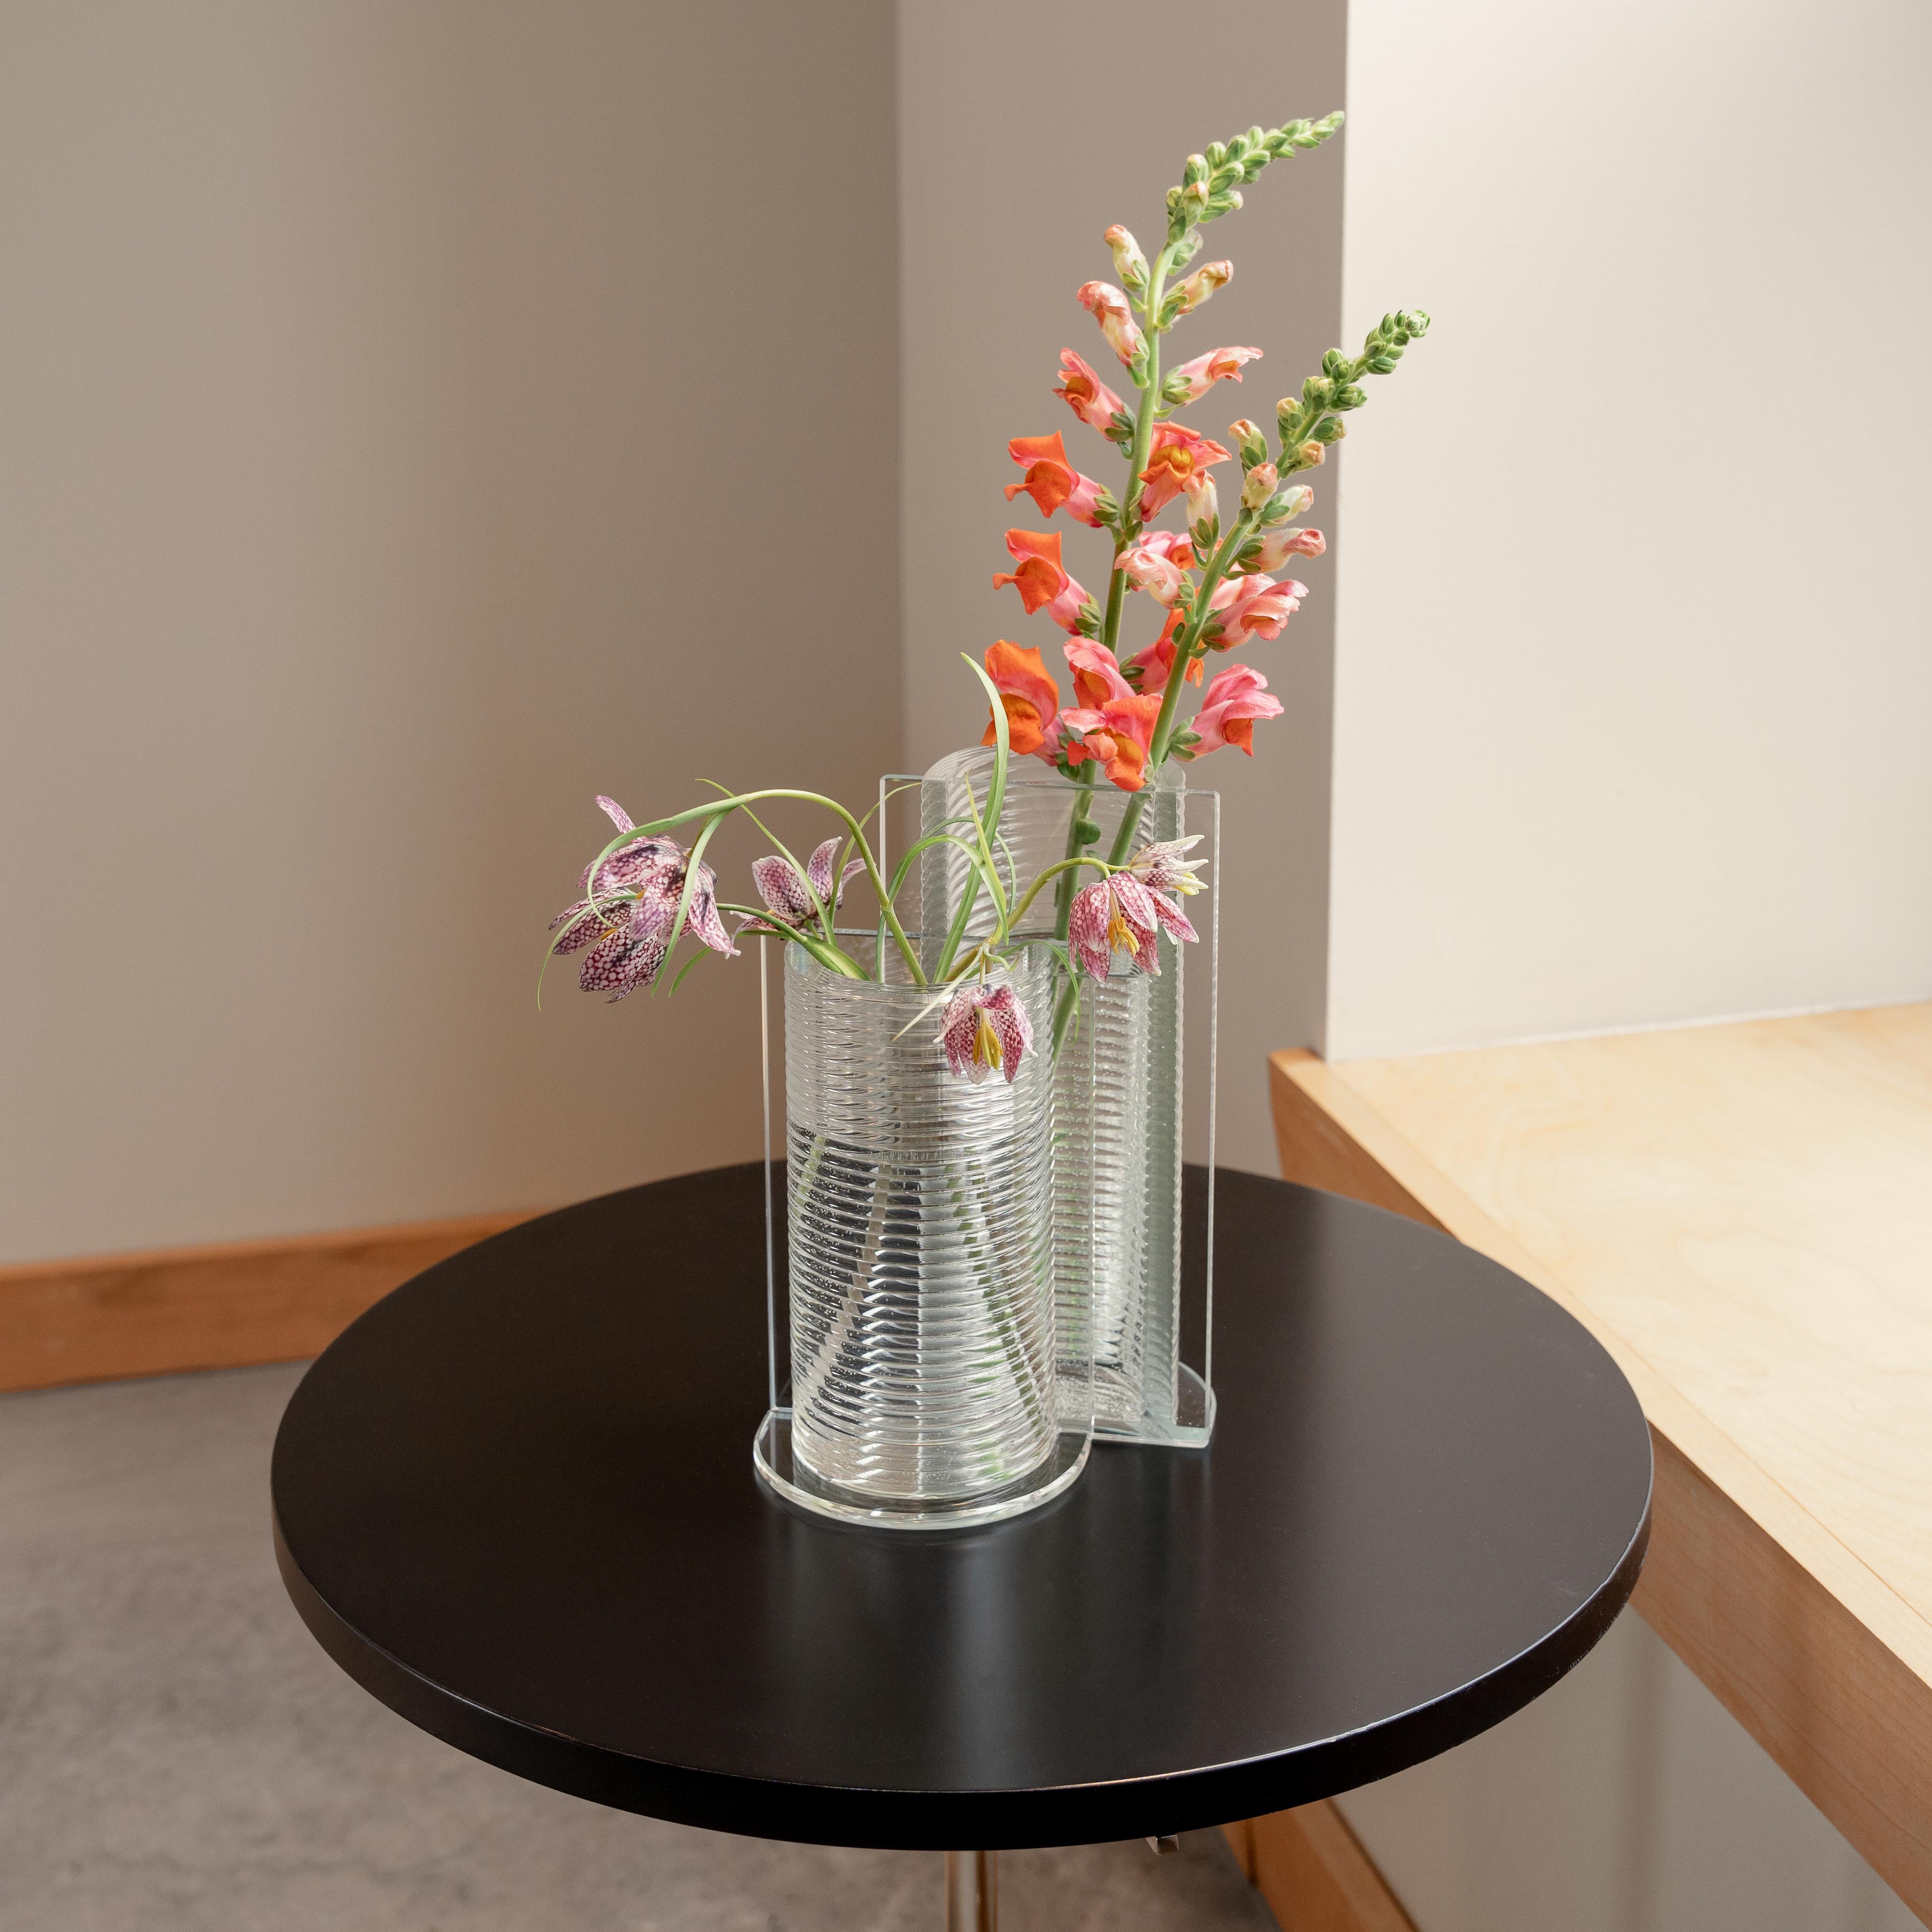 Made using Evenline's one of a kind molten glass 3D printer, Bisect is a unique and recognizable silhouette to brighten up your home and bring your favorite flowers to life. Bisect is designed to be able to shine as a single vase, but also pairs